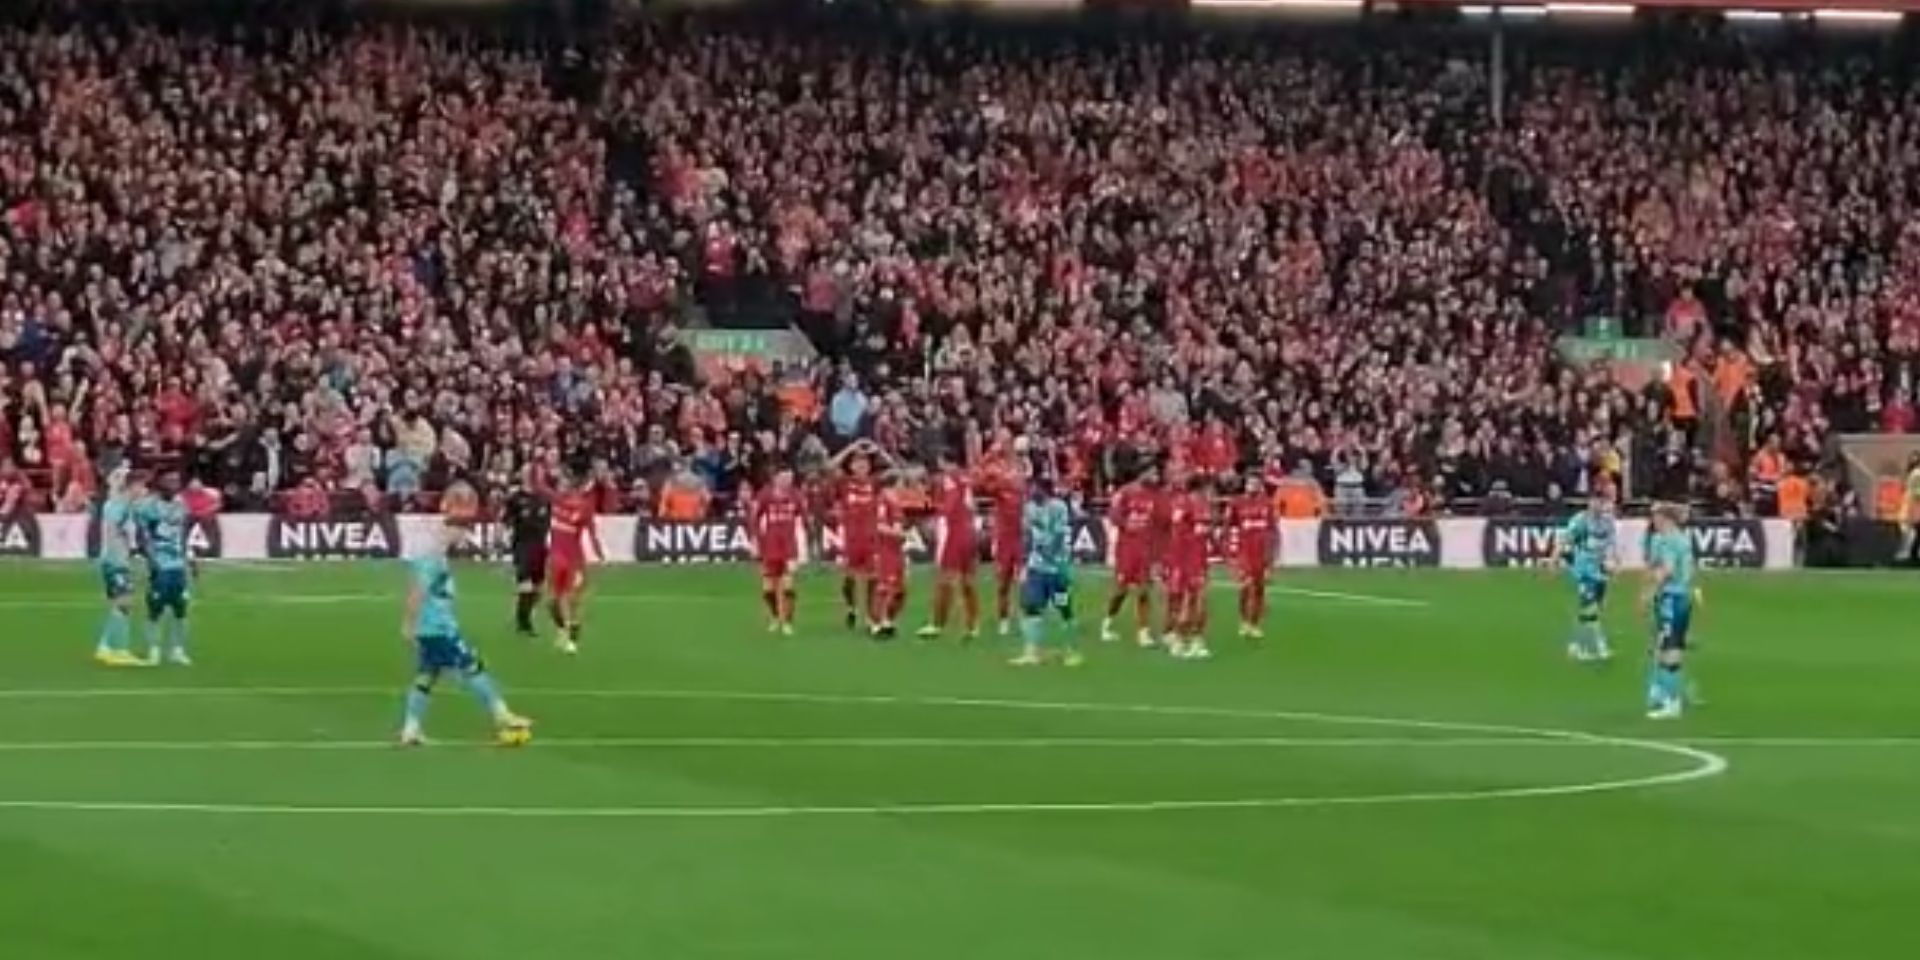 (Video) Nunez sends message to the Kop after scoring his against Southampton